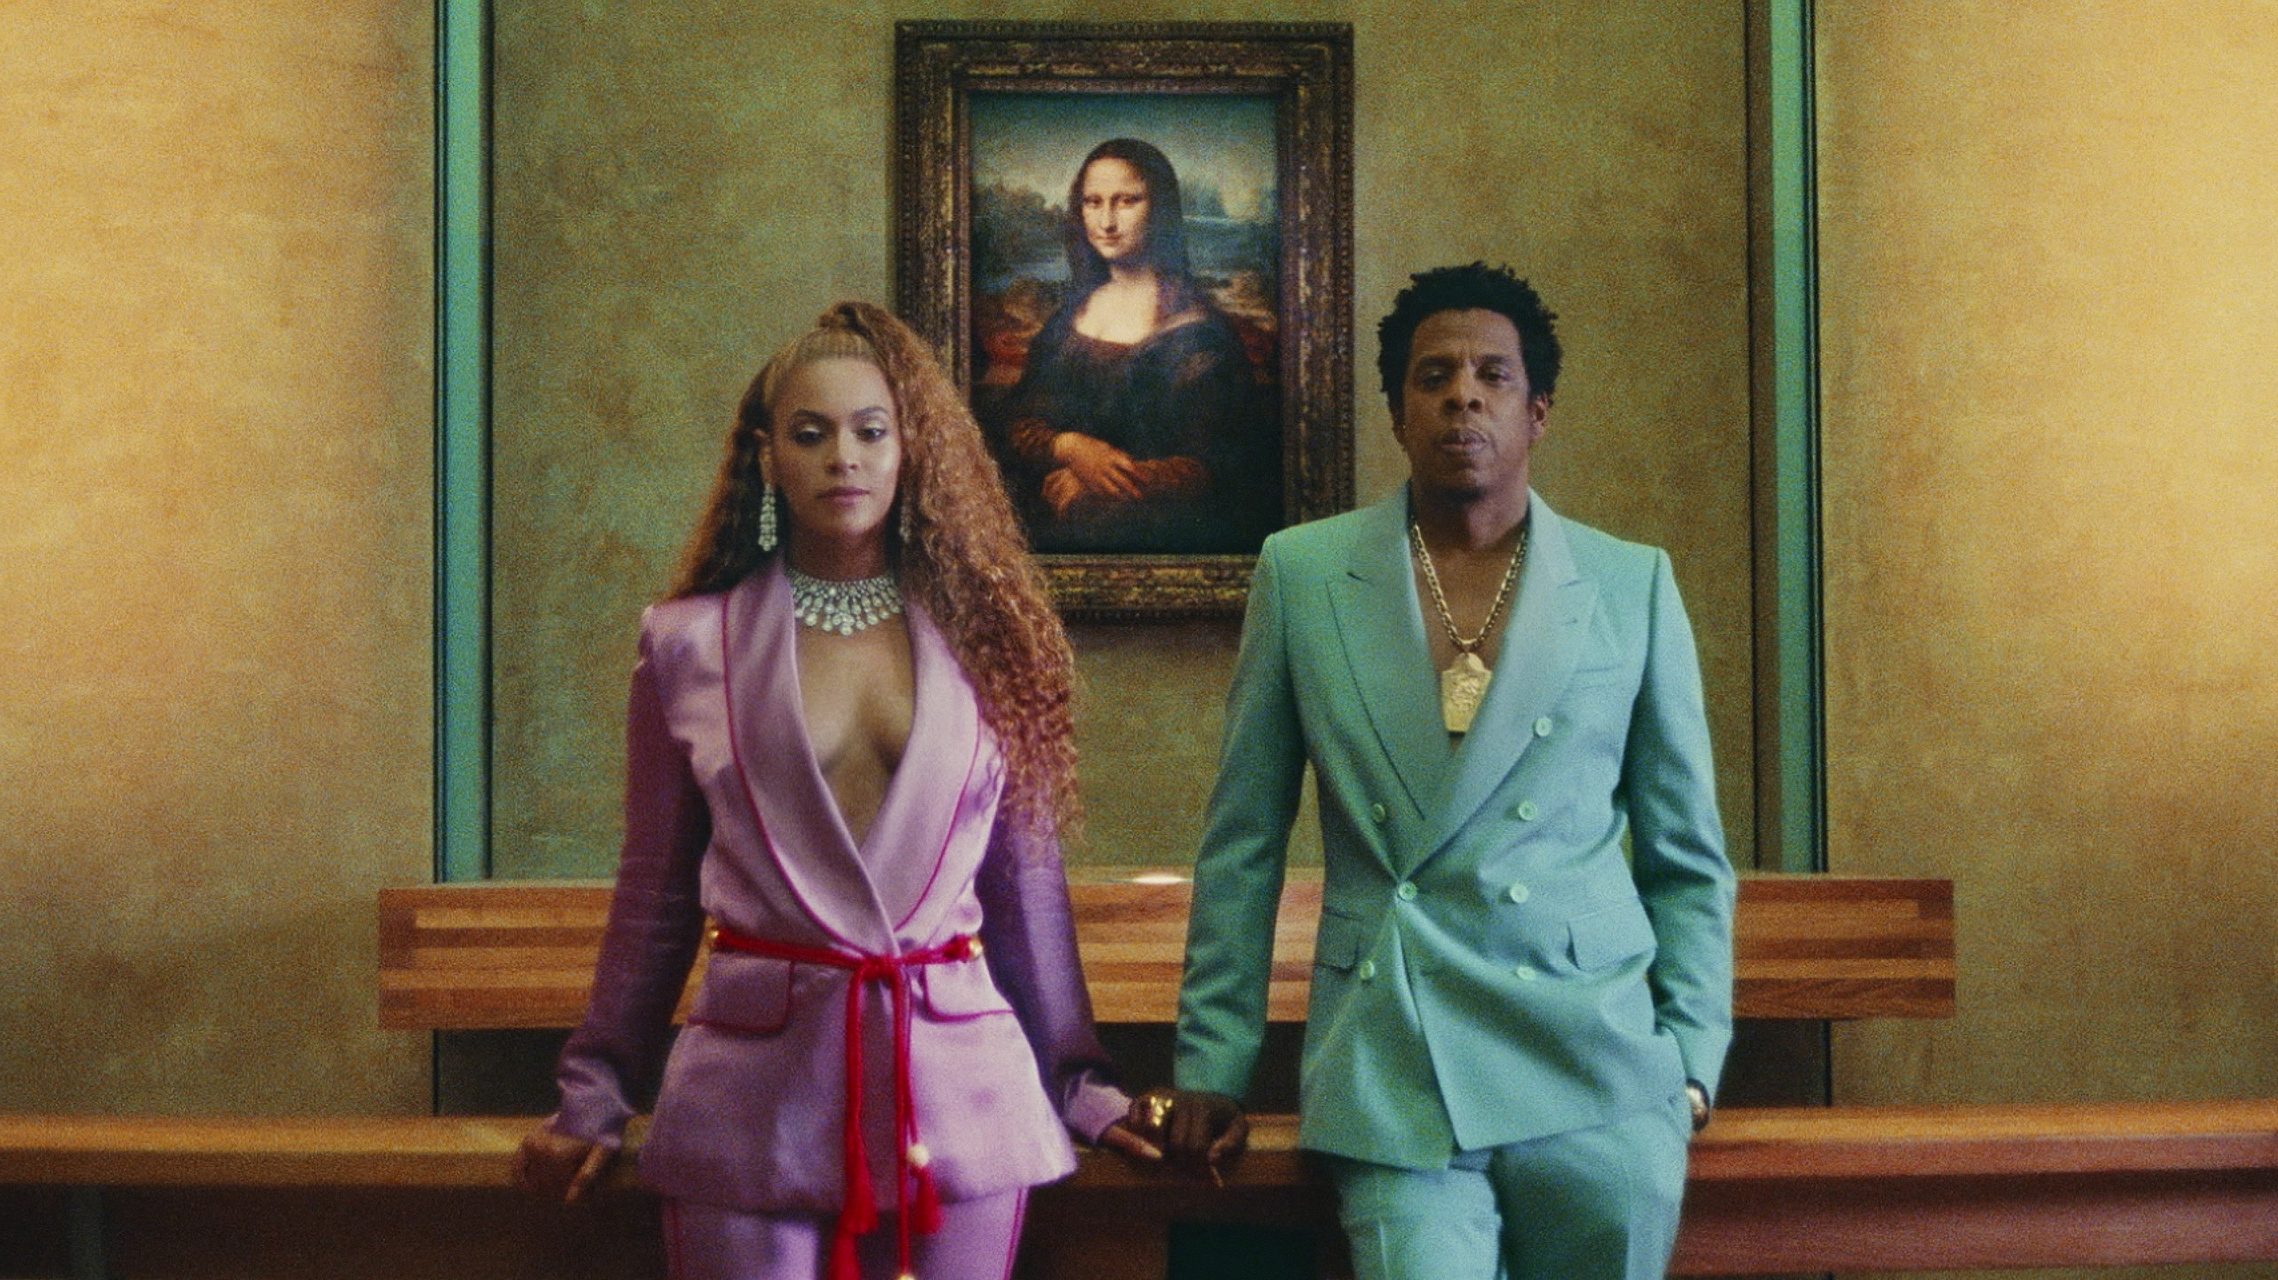 Let The Carters take you on a tour of the Louvre designed for this age